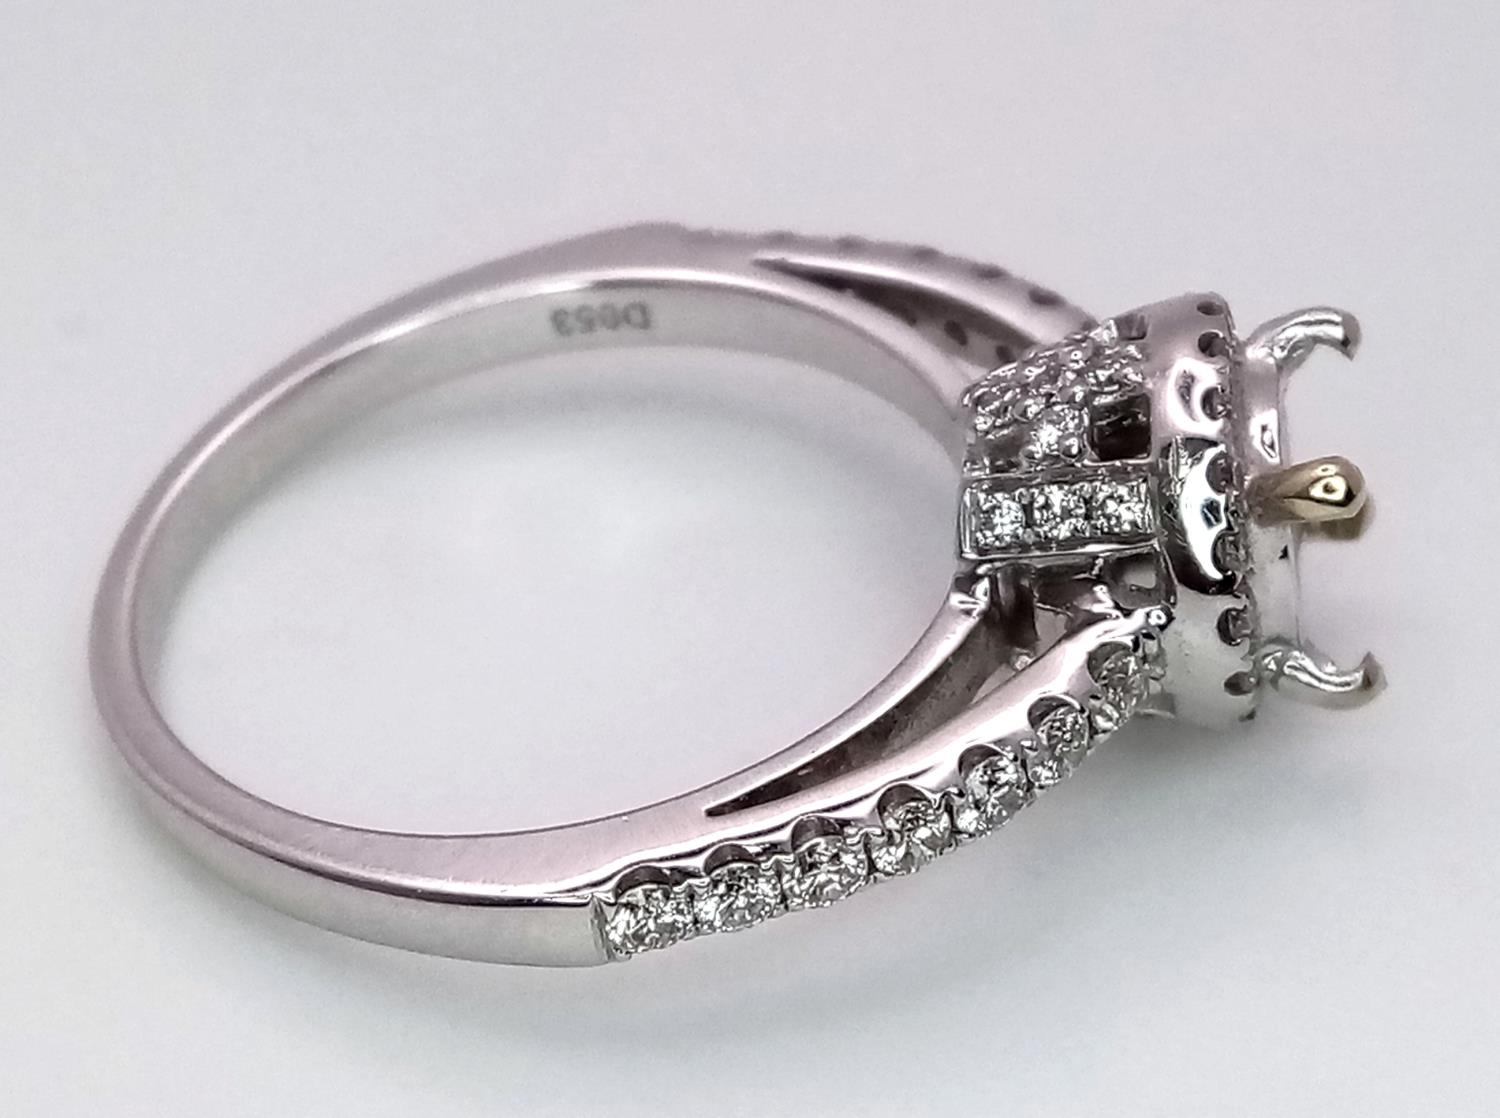 AN 18K WHITE GOLD DIAMOND HALO SOLITAIRE RING MOUNT WITH DIAMOND SET SHOULDERS. Ready to set your - Image 6 of 8